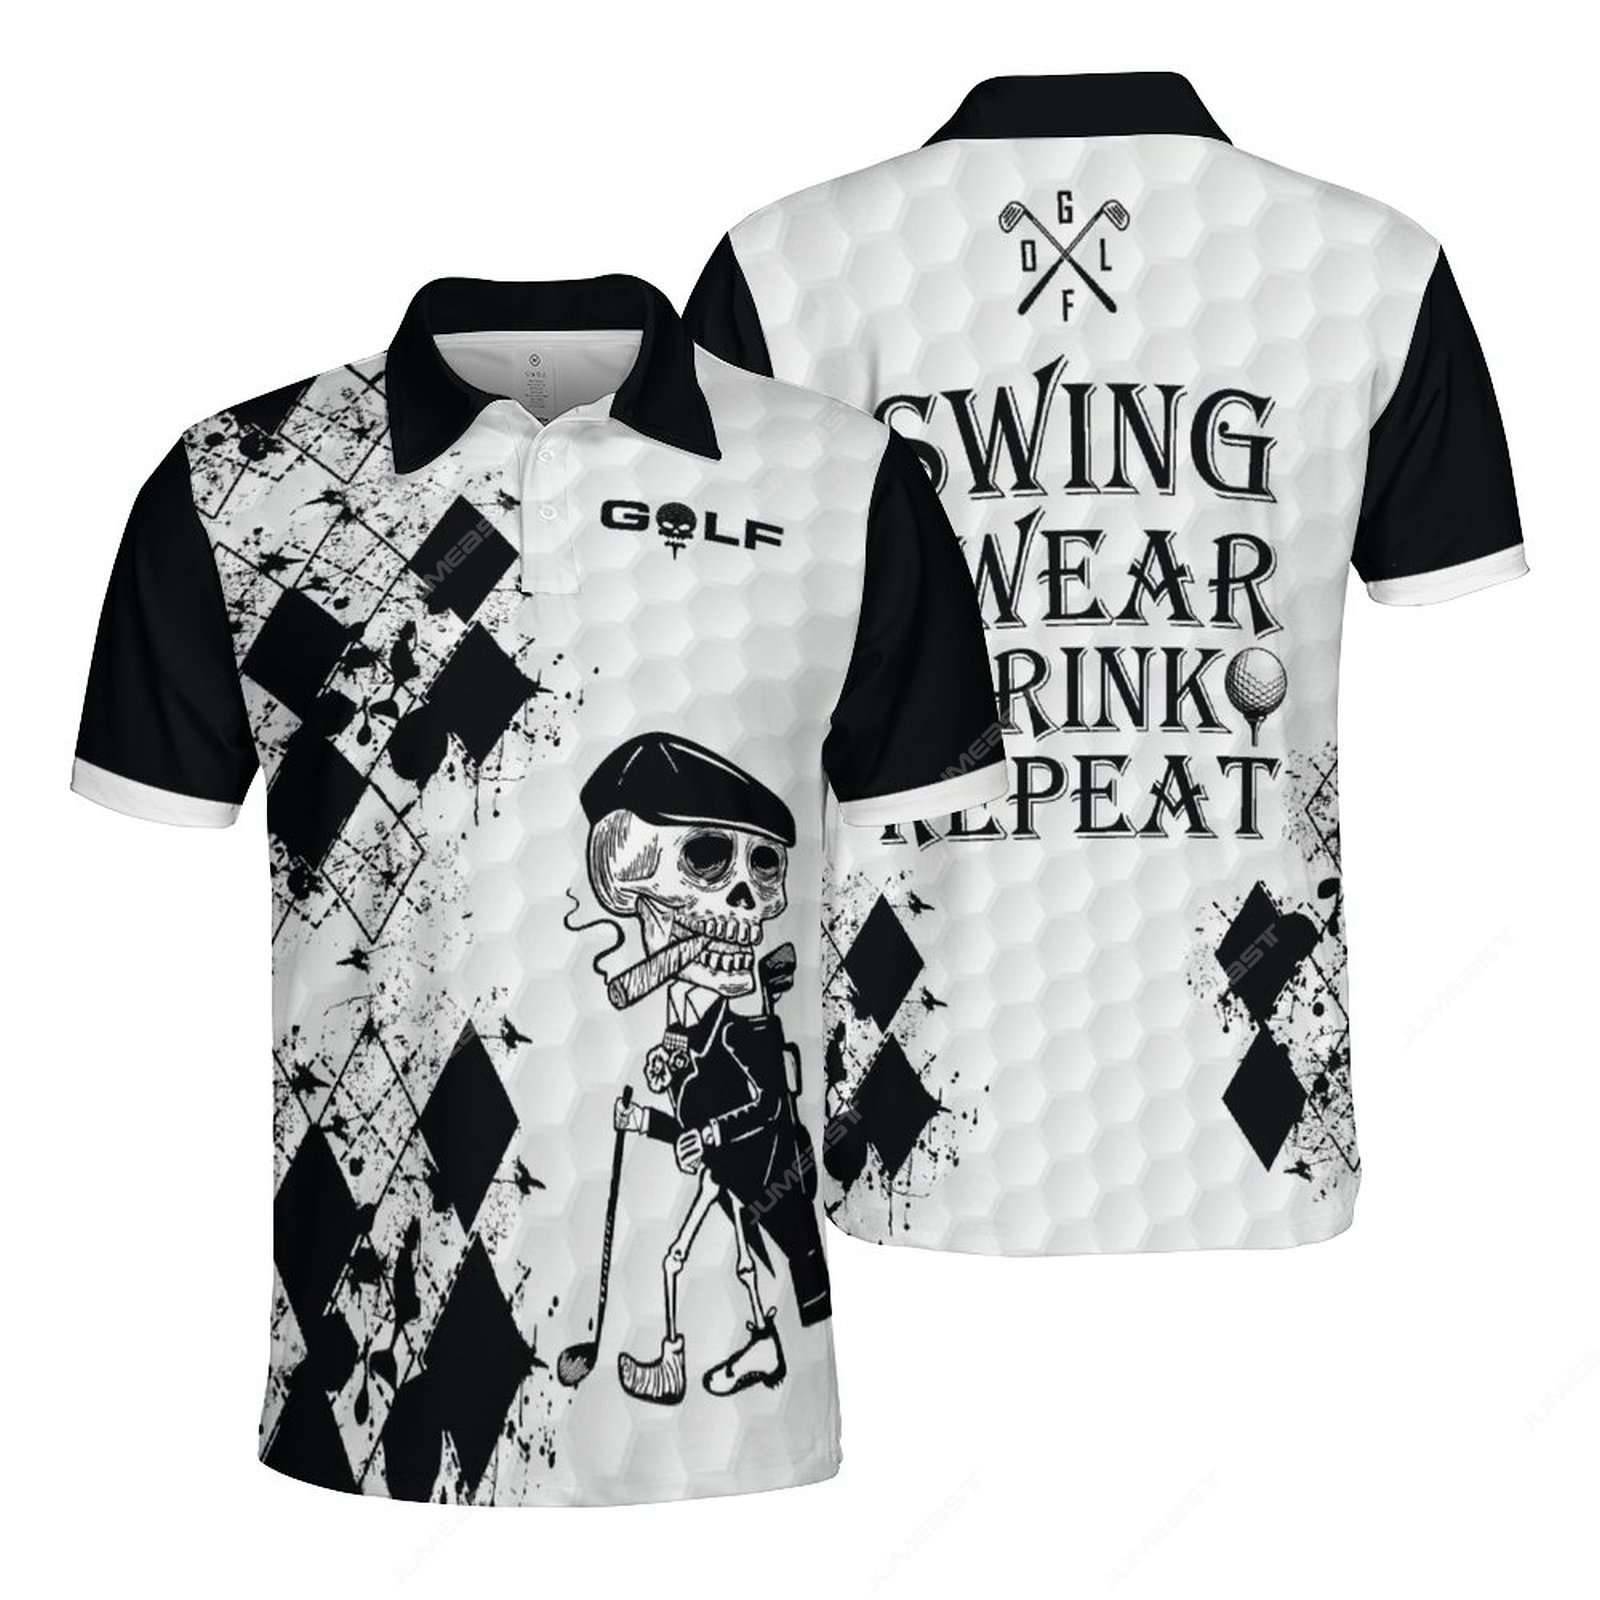 Jumeast Golf Polo Shirts Swing Swear Look For Ball Repeat Skull Men White